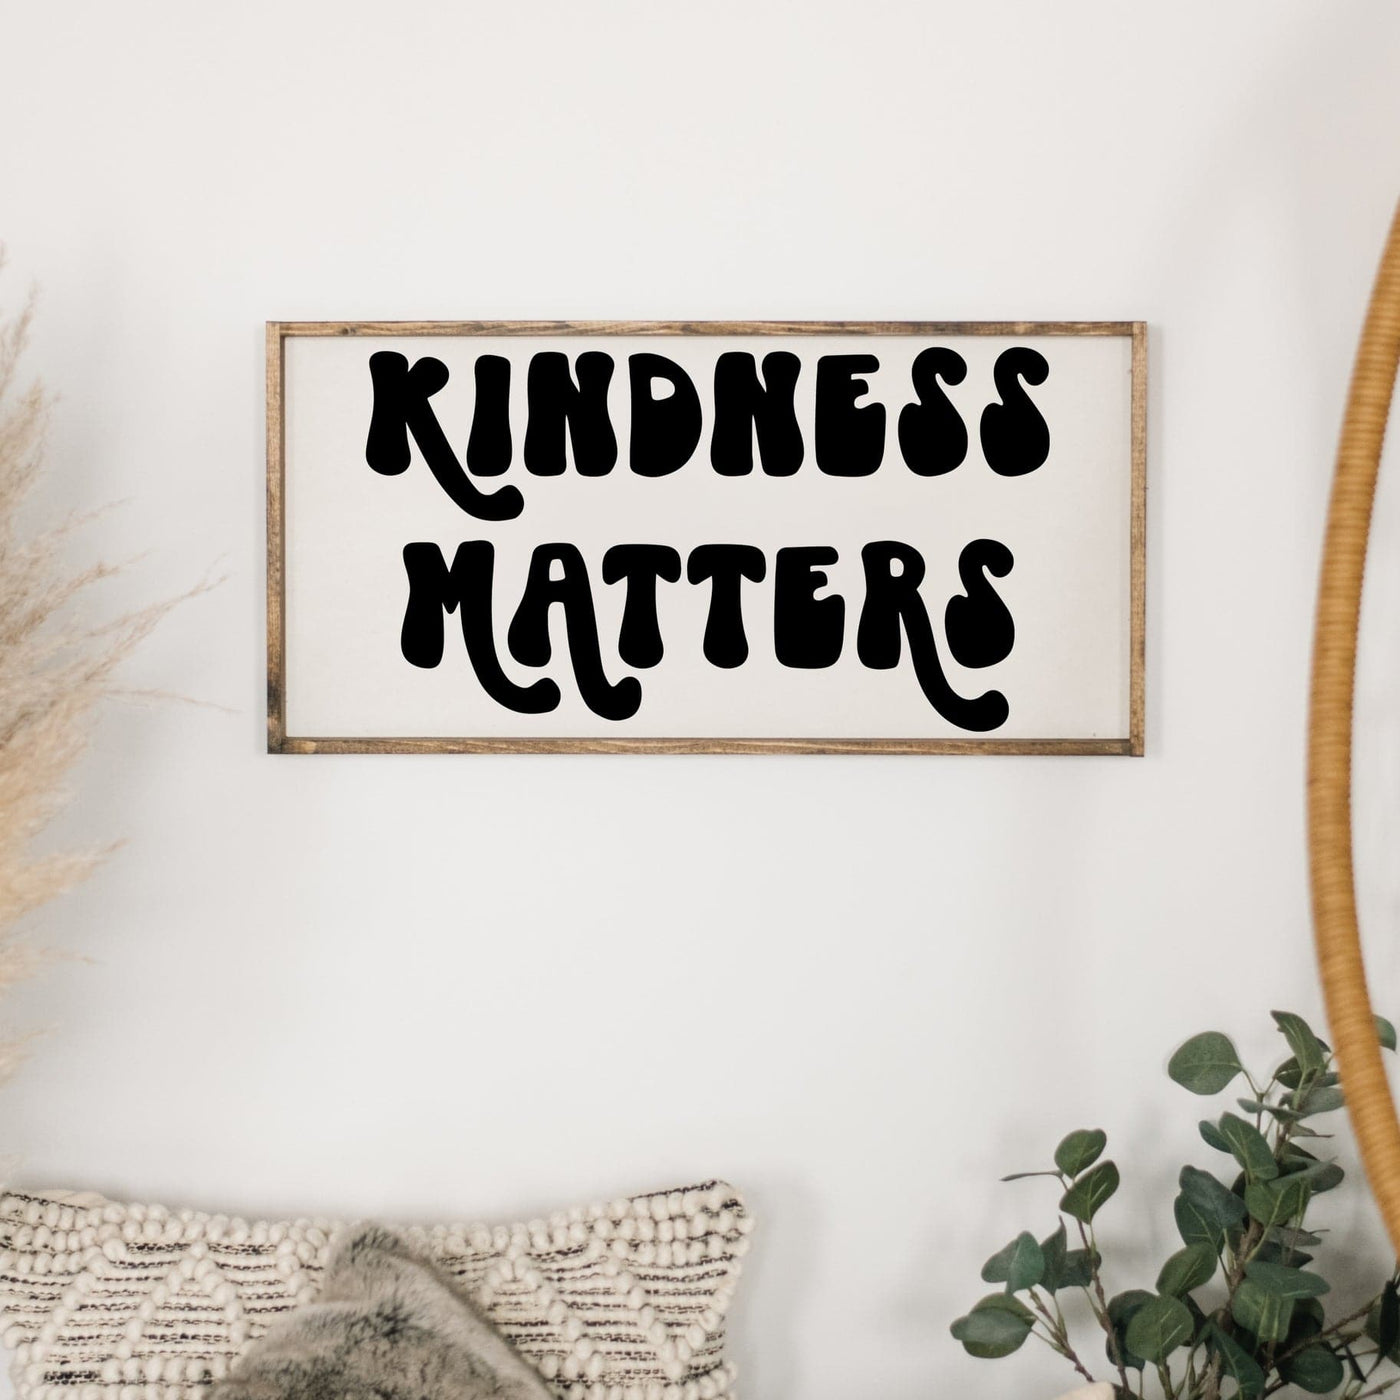 Kindess Matters | Wood Sign - The Local Space